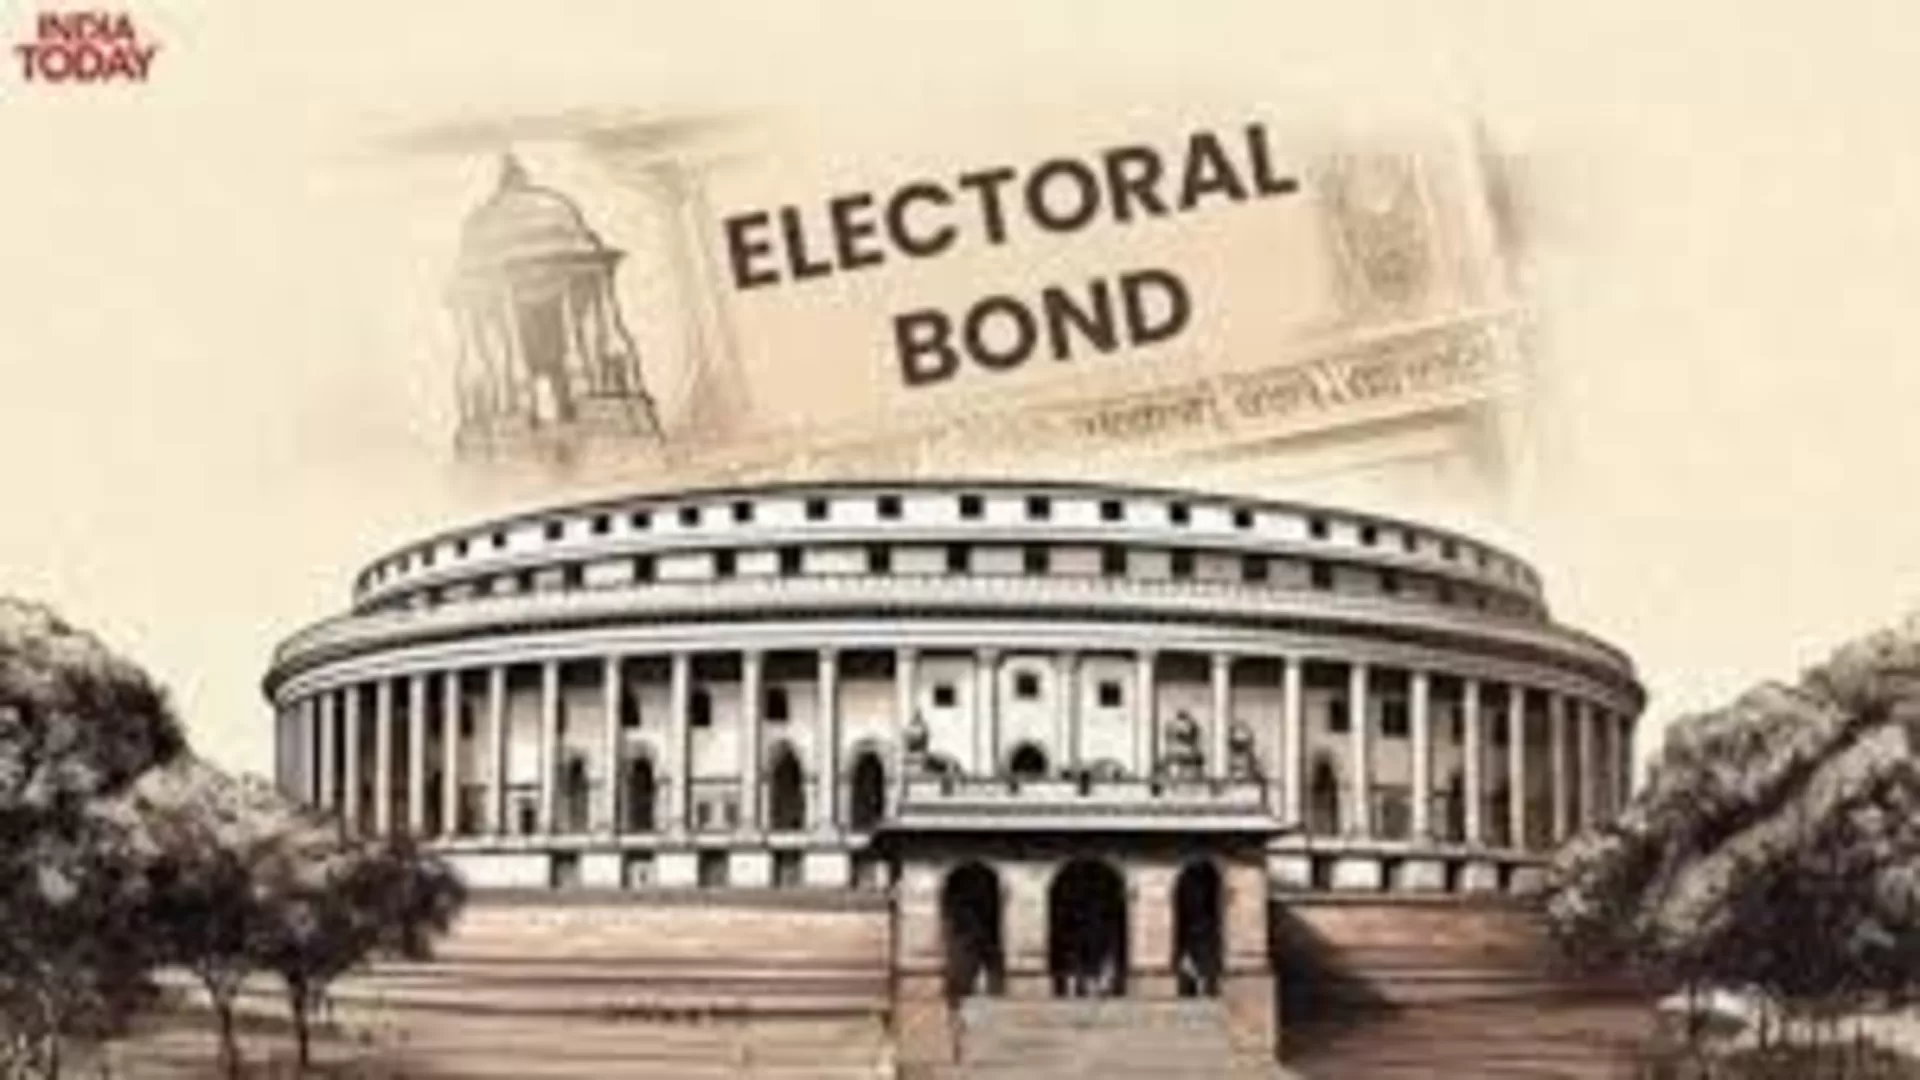 India's Electoral Bond Controversy: Corporate Influence and Political Transparency